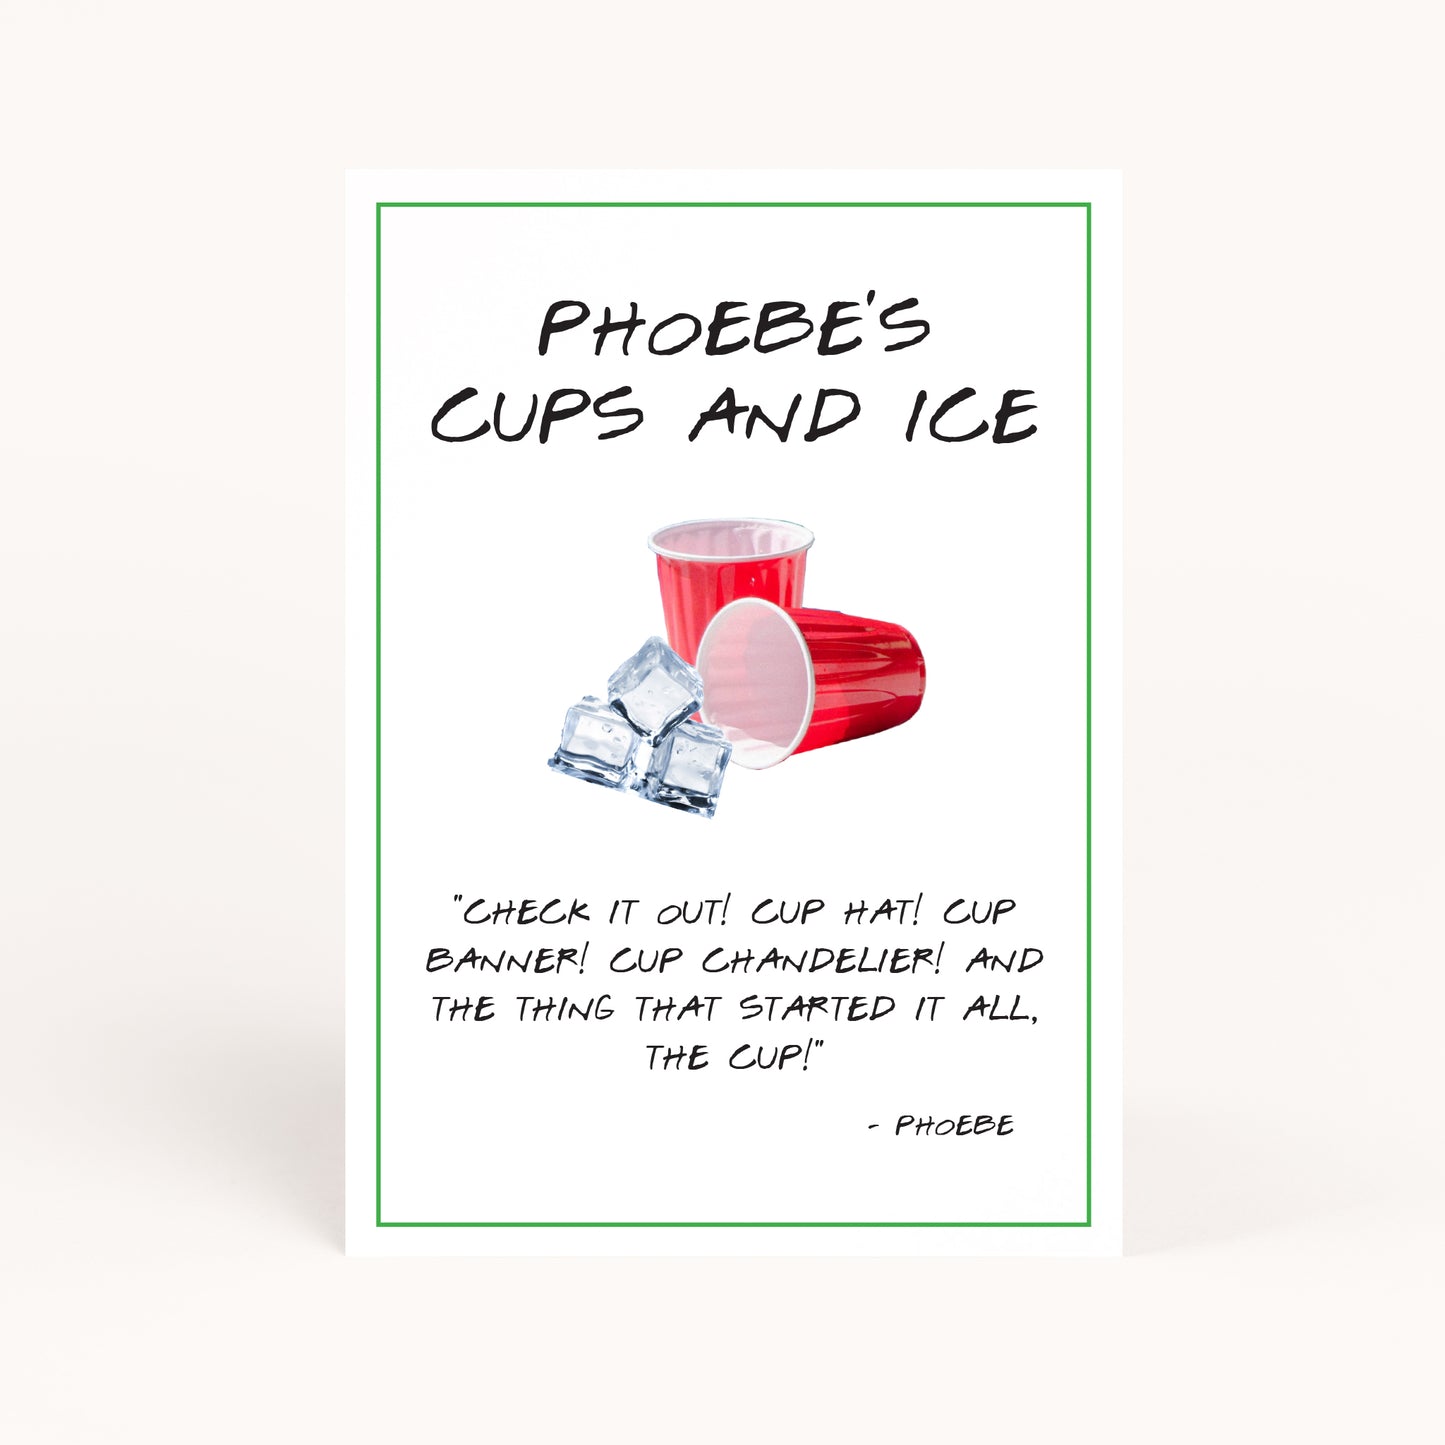 Friends Party Phoebe's Cups and Ice Sign Printable